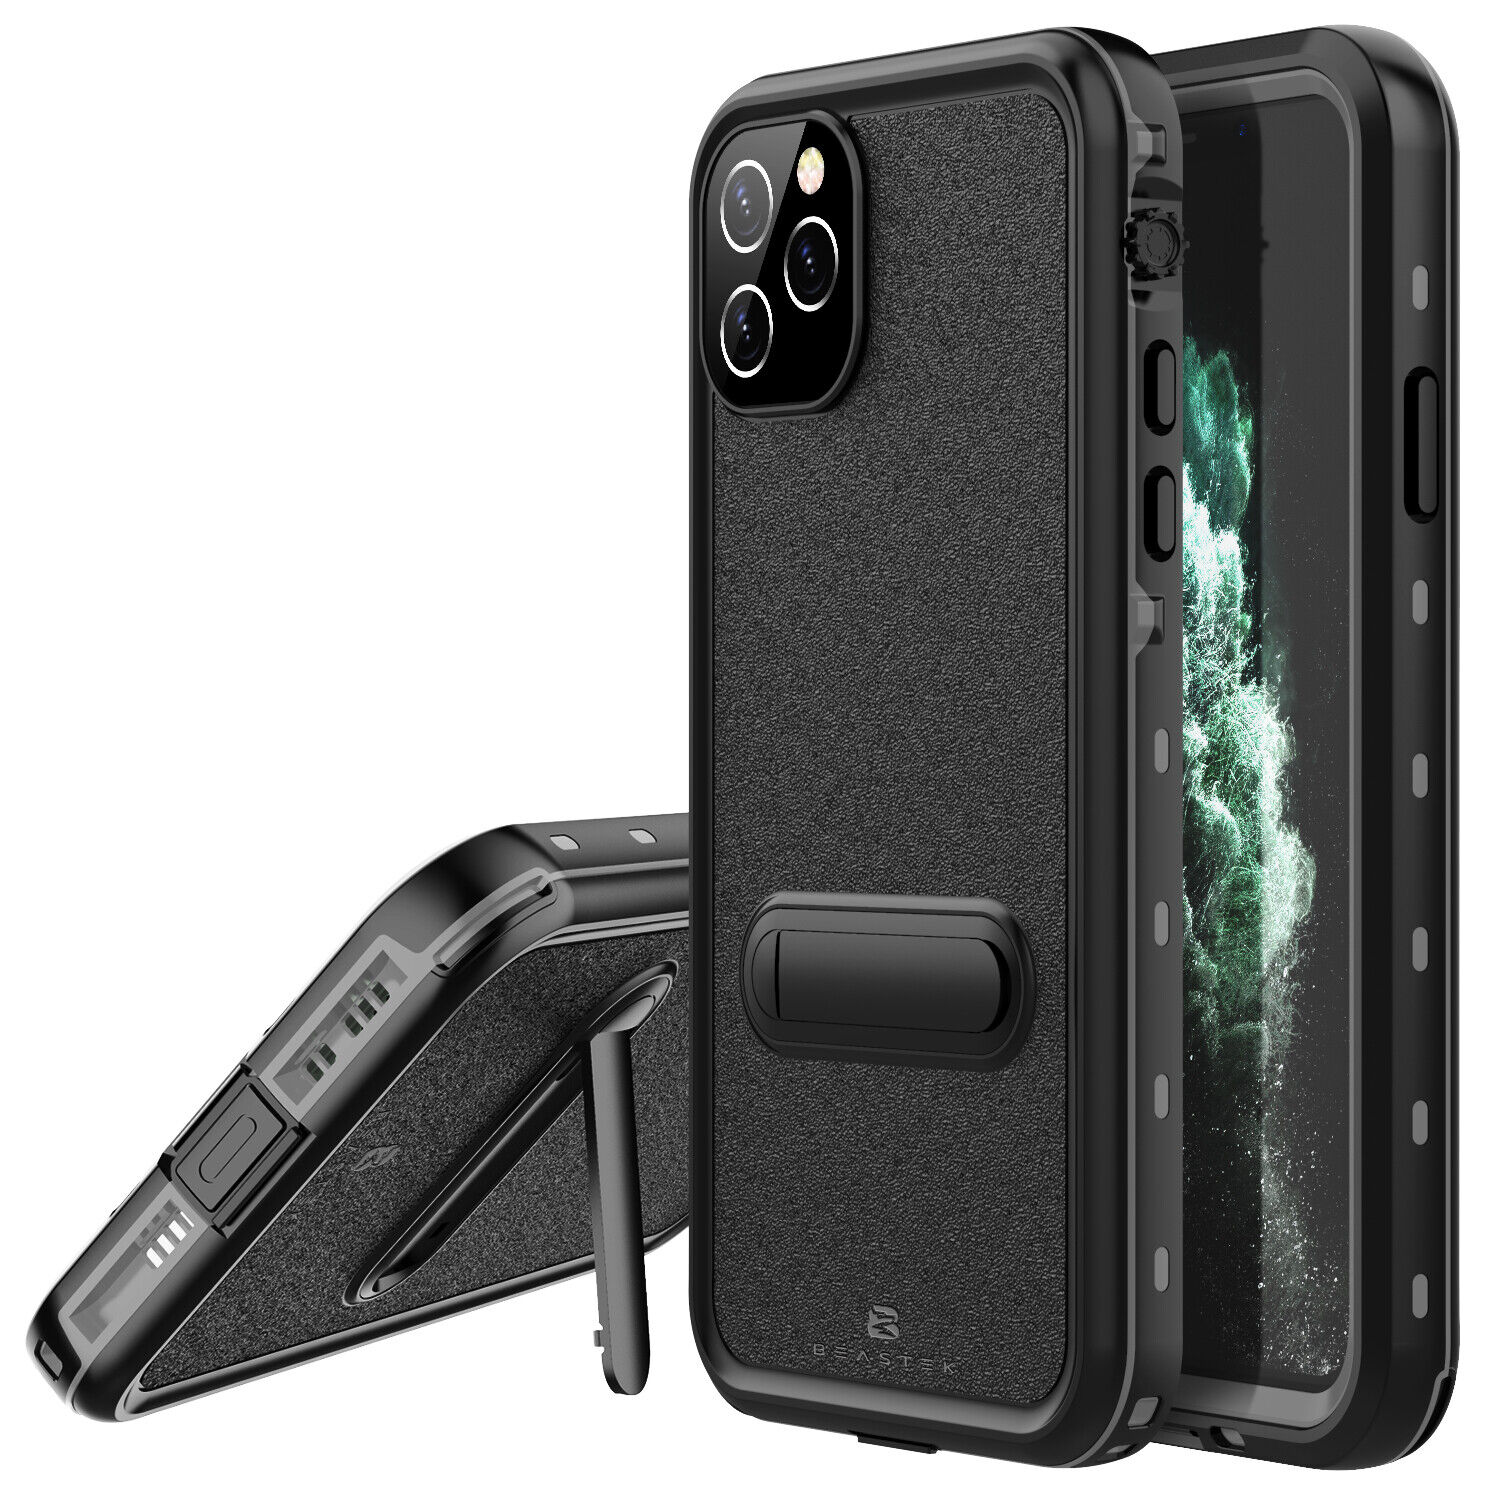 For Apple iPhone 11 / 11 Pro Max Waterproof Case Shockproof Cover with Kickstand